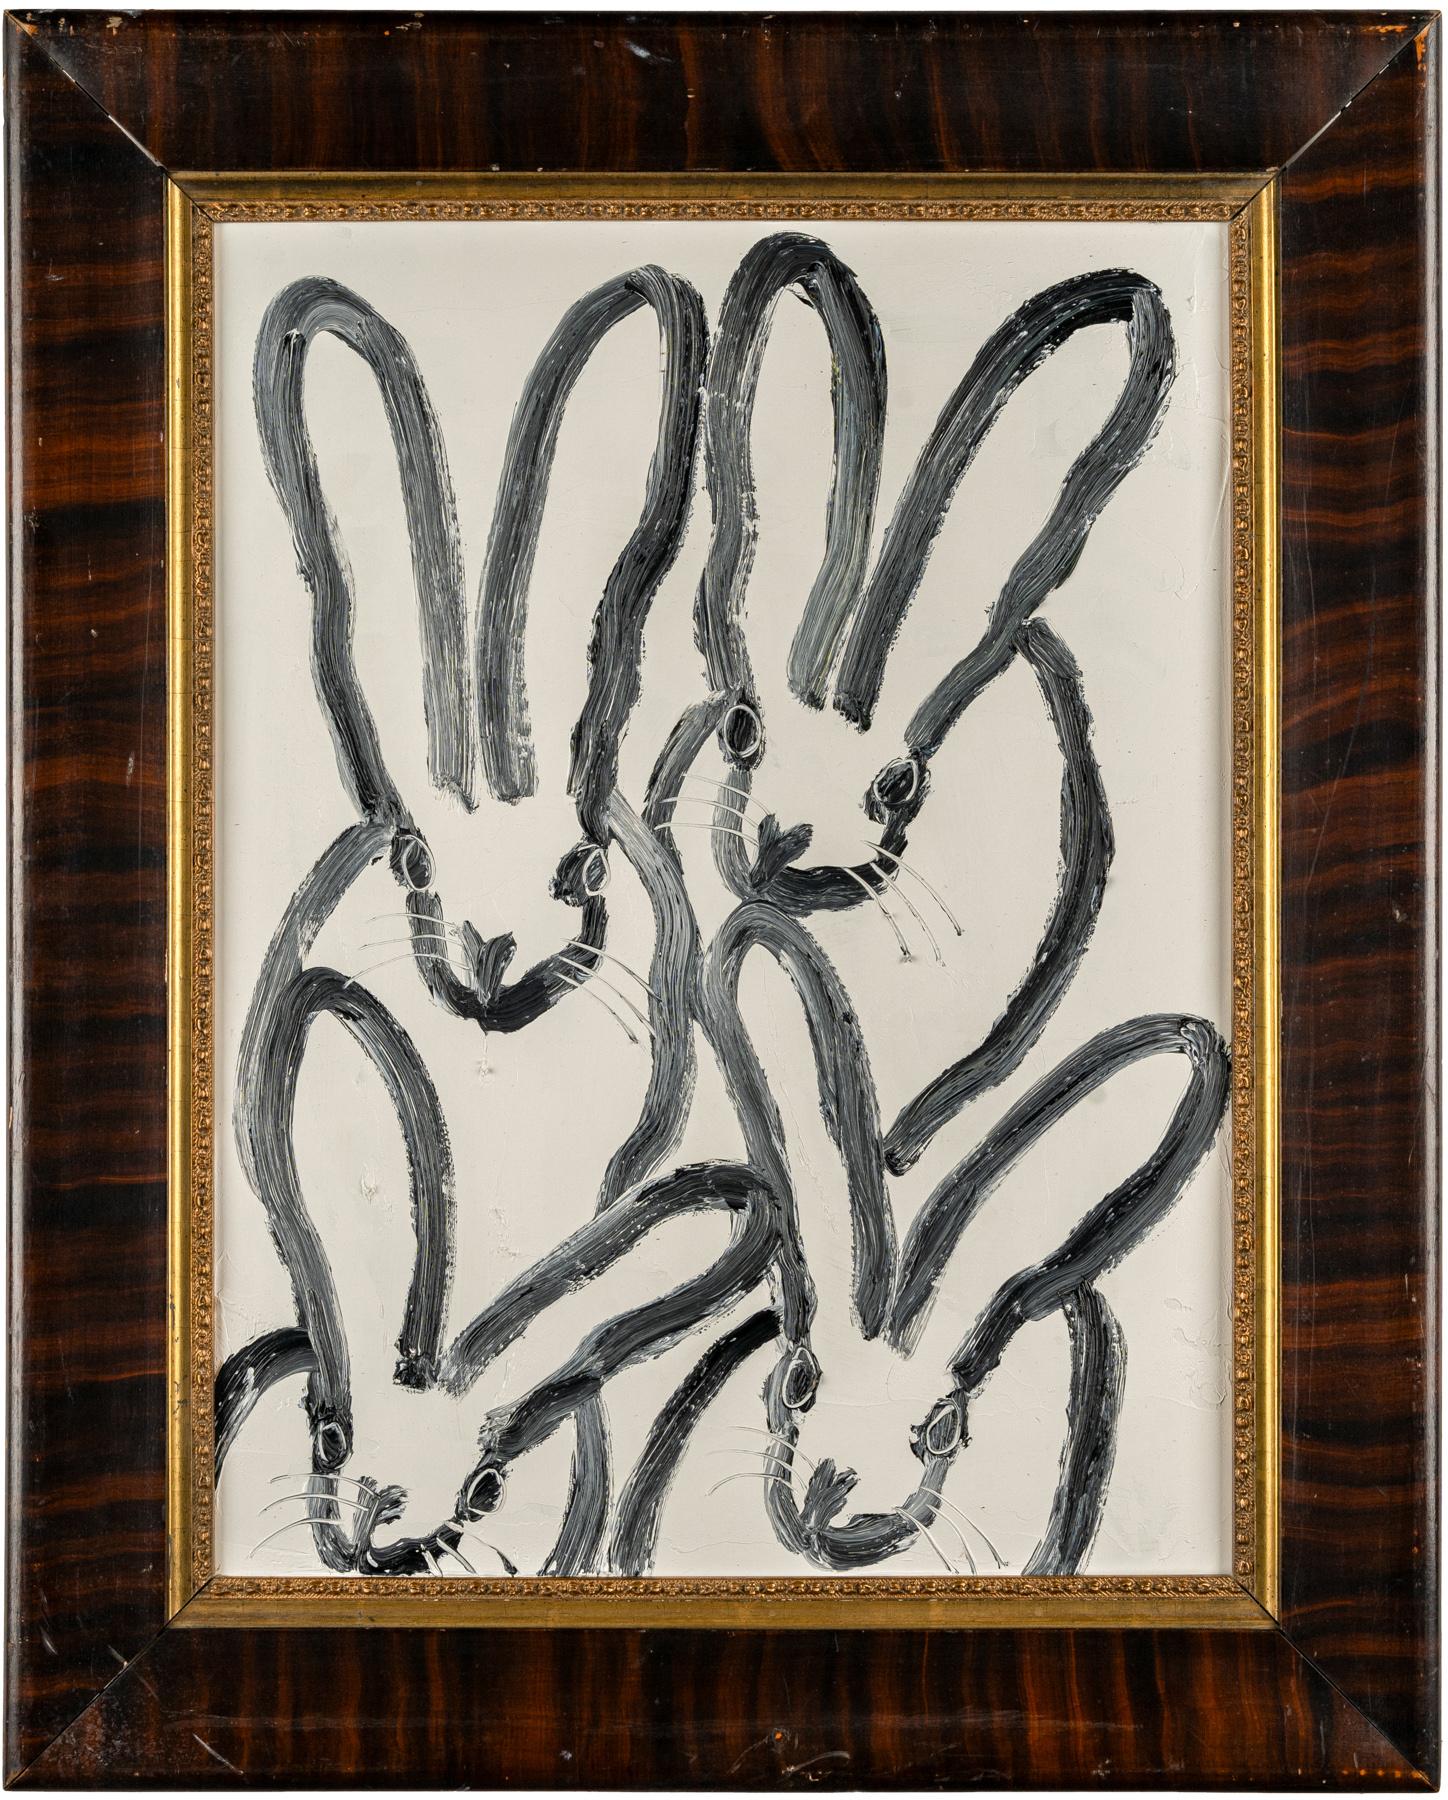 Available at Madelyn Jordon Fine Art. Hunt Slonem bunny oil painting 'Dutch Hutch' 2023. Oil on wood, 24.5 x 18.5 in. / Frame: 31 x 25 in. This painting features Slonem's signature bunny outlined in black over a white background. Framed in a